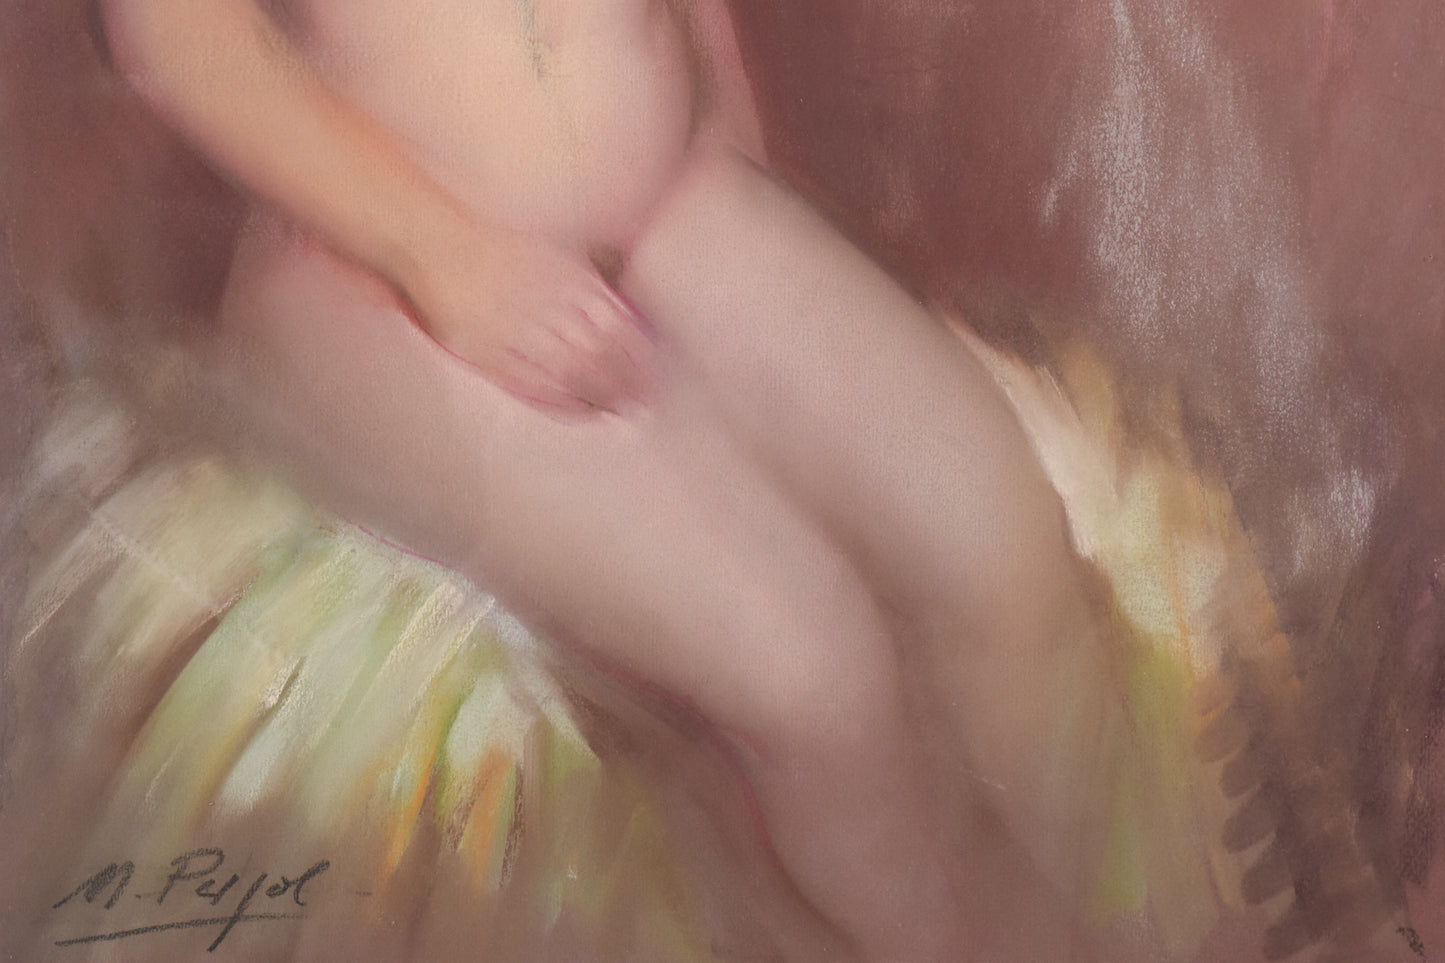 Framed and Signed Pastel of a Nude